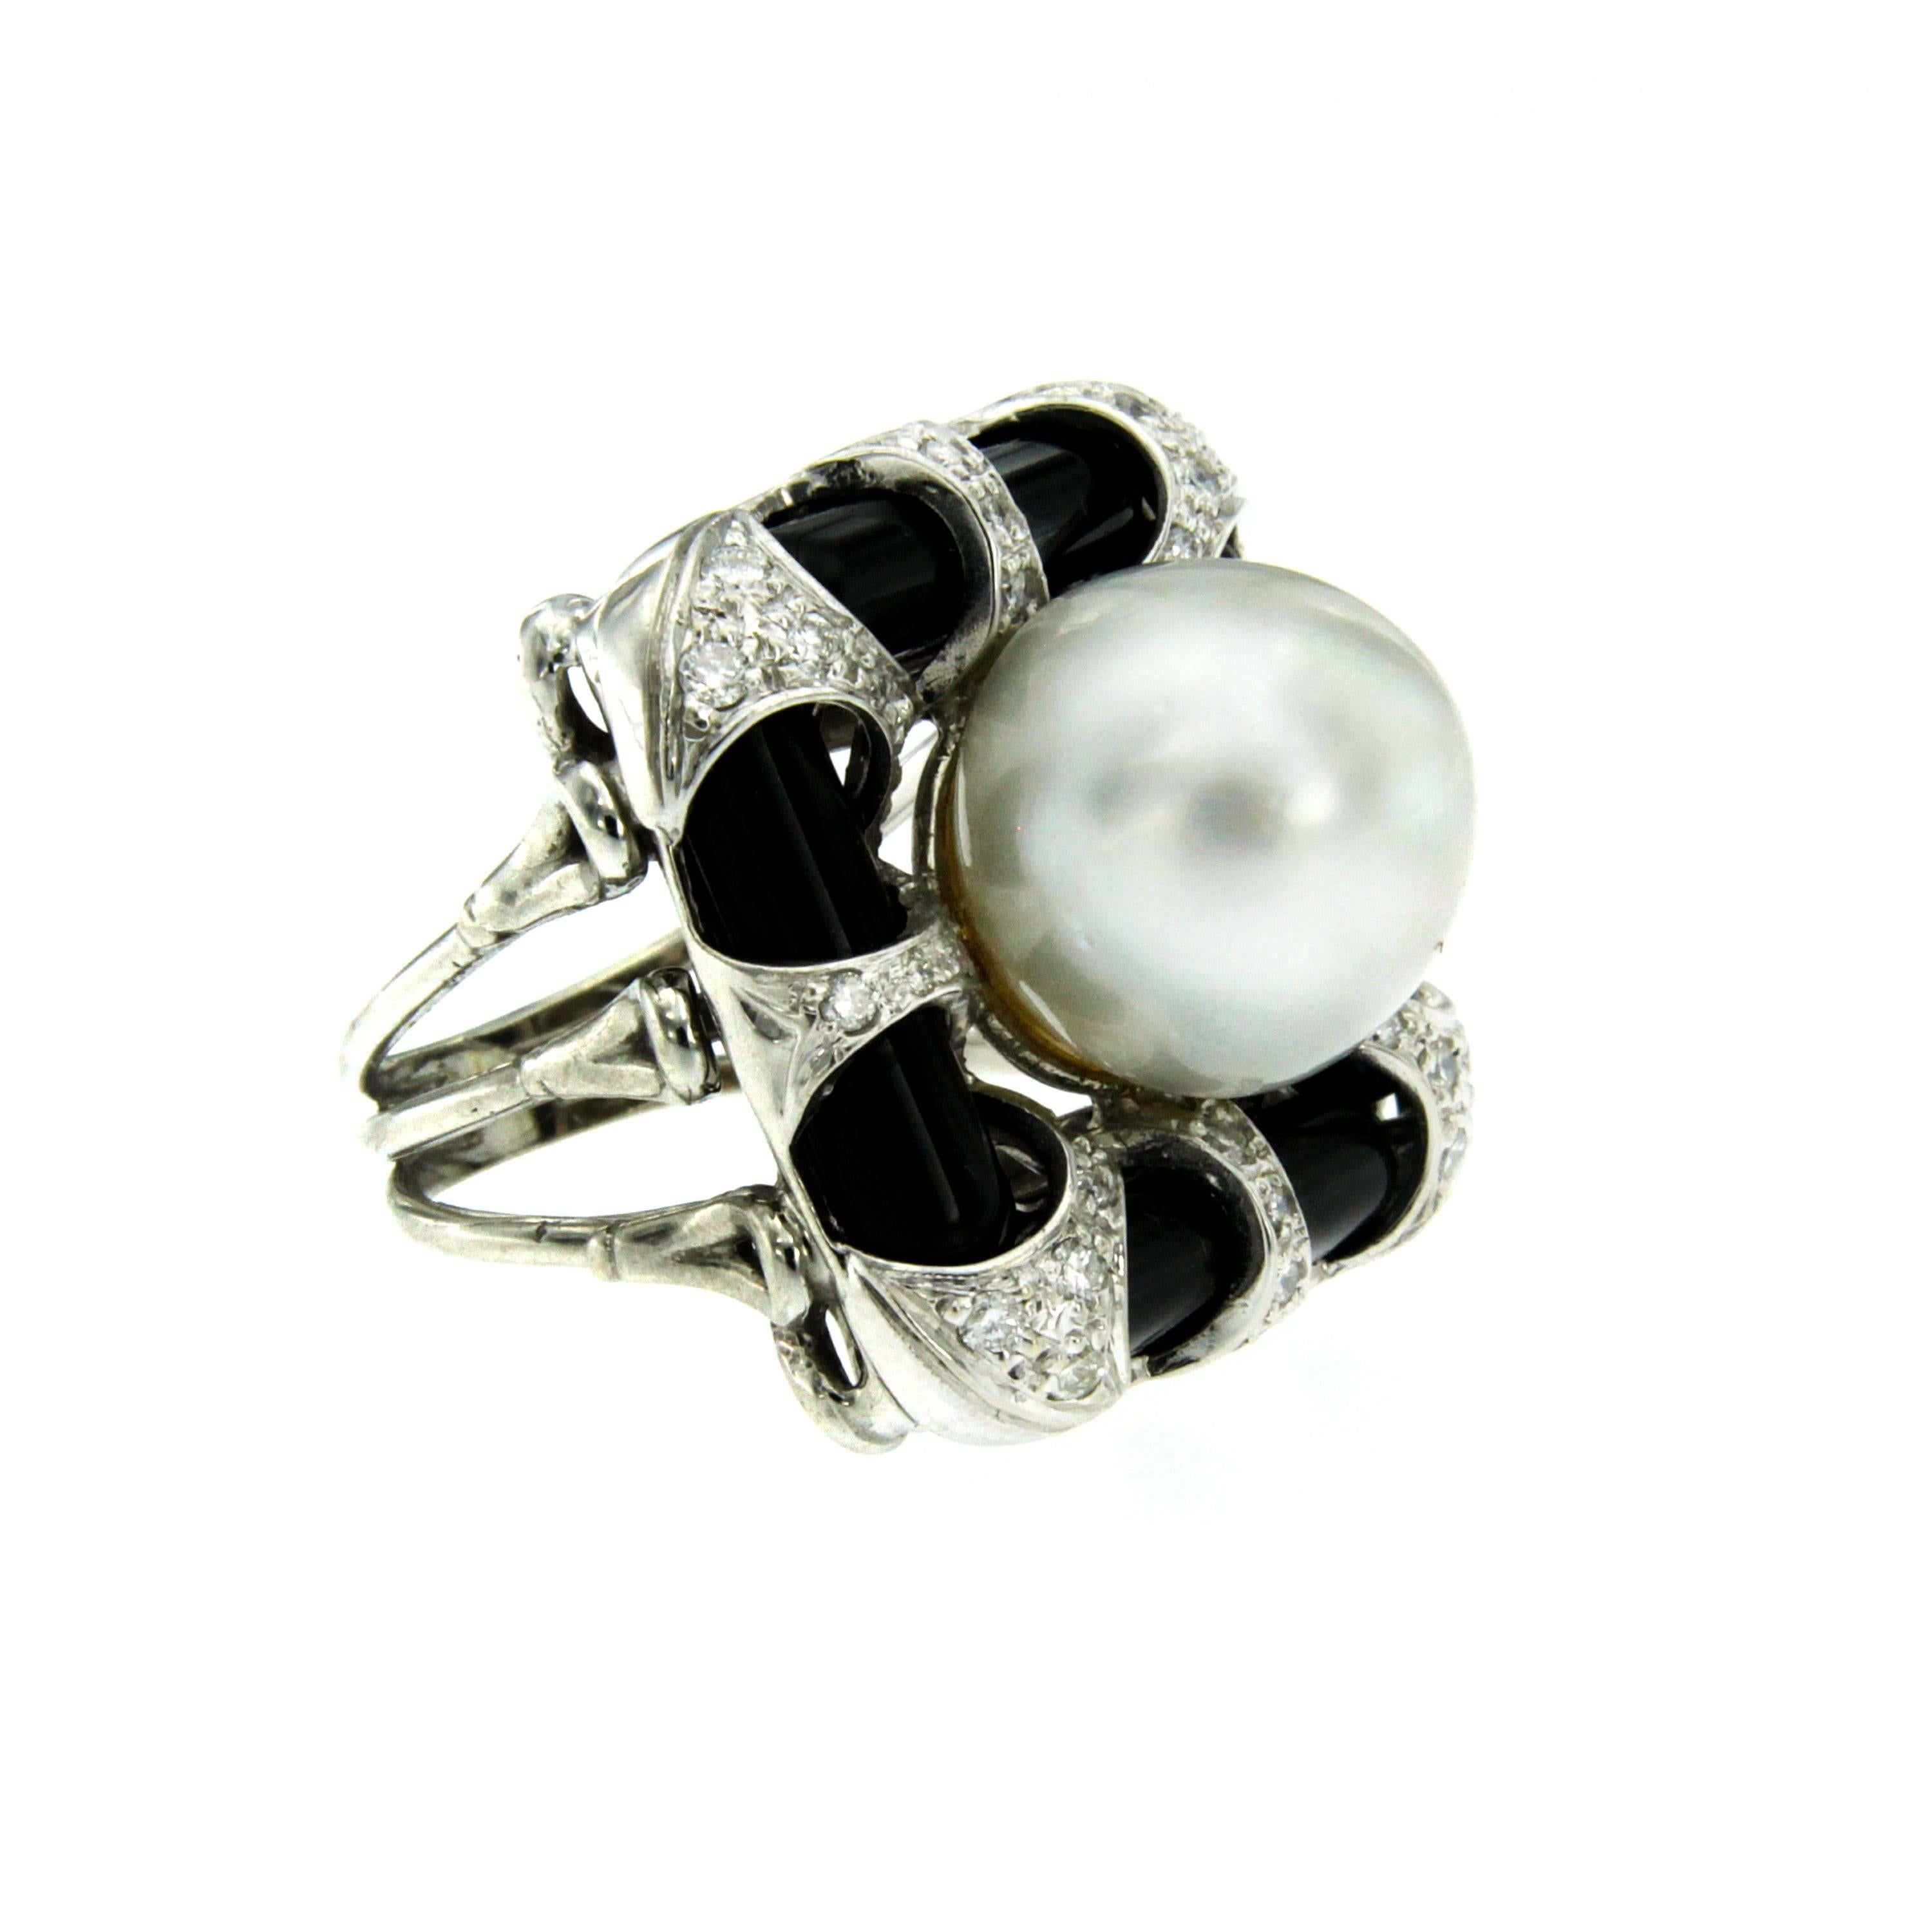 A magnificent 18k white Gold ring set with a South Sea Pearl 13mm, round brilliant cut diamonds 0.50 cts and black Onyx. Circa 1970

CONDITION: Pre-owned - Excellent 
METAL: 18k Gold 
GEM STONE: Diamonds - Onyx - Pearl
WEIGHT: 18.98 grams 
RING